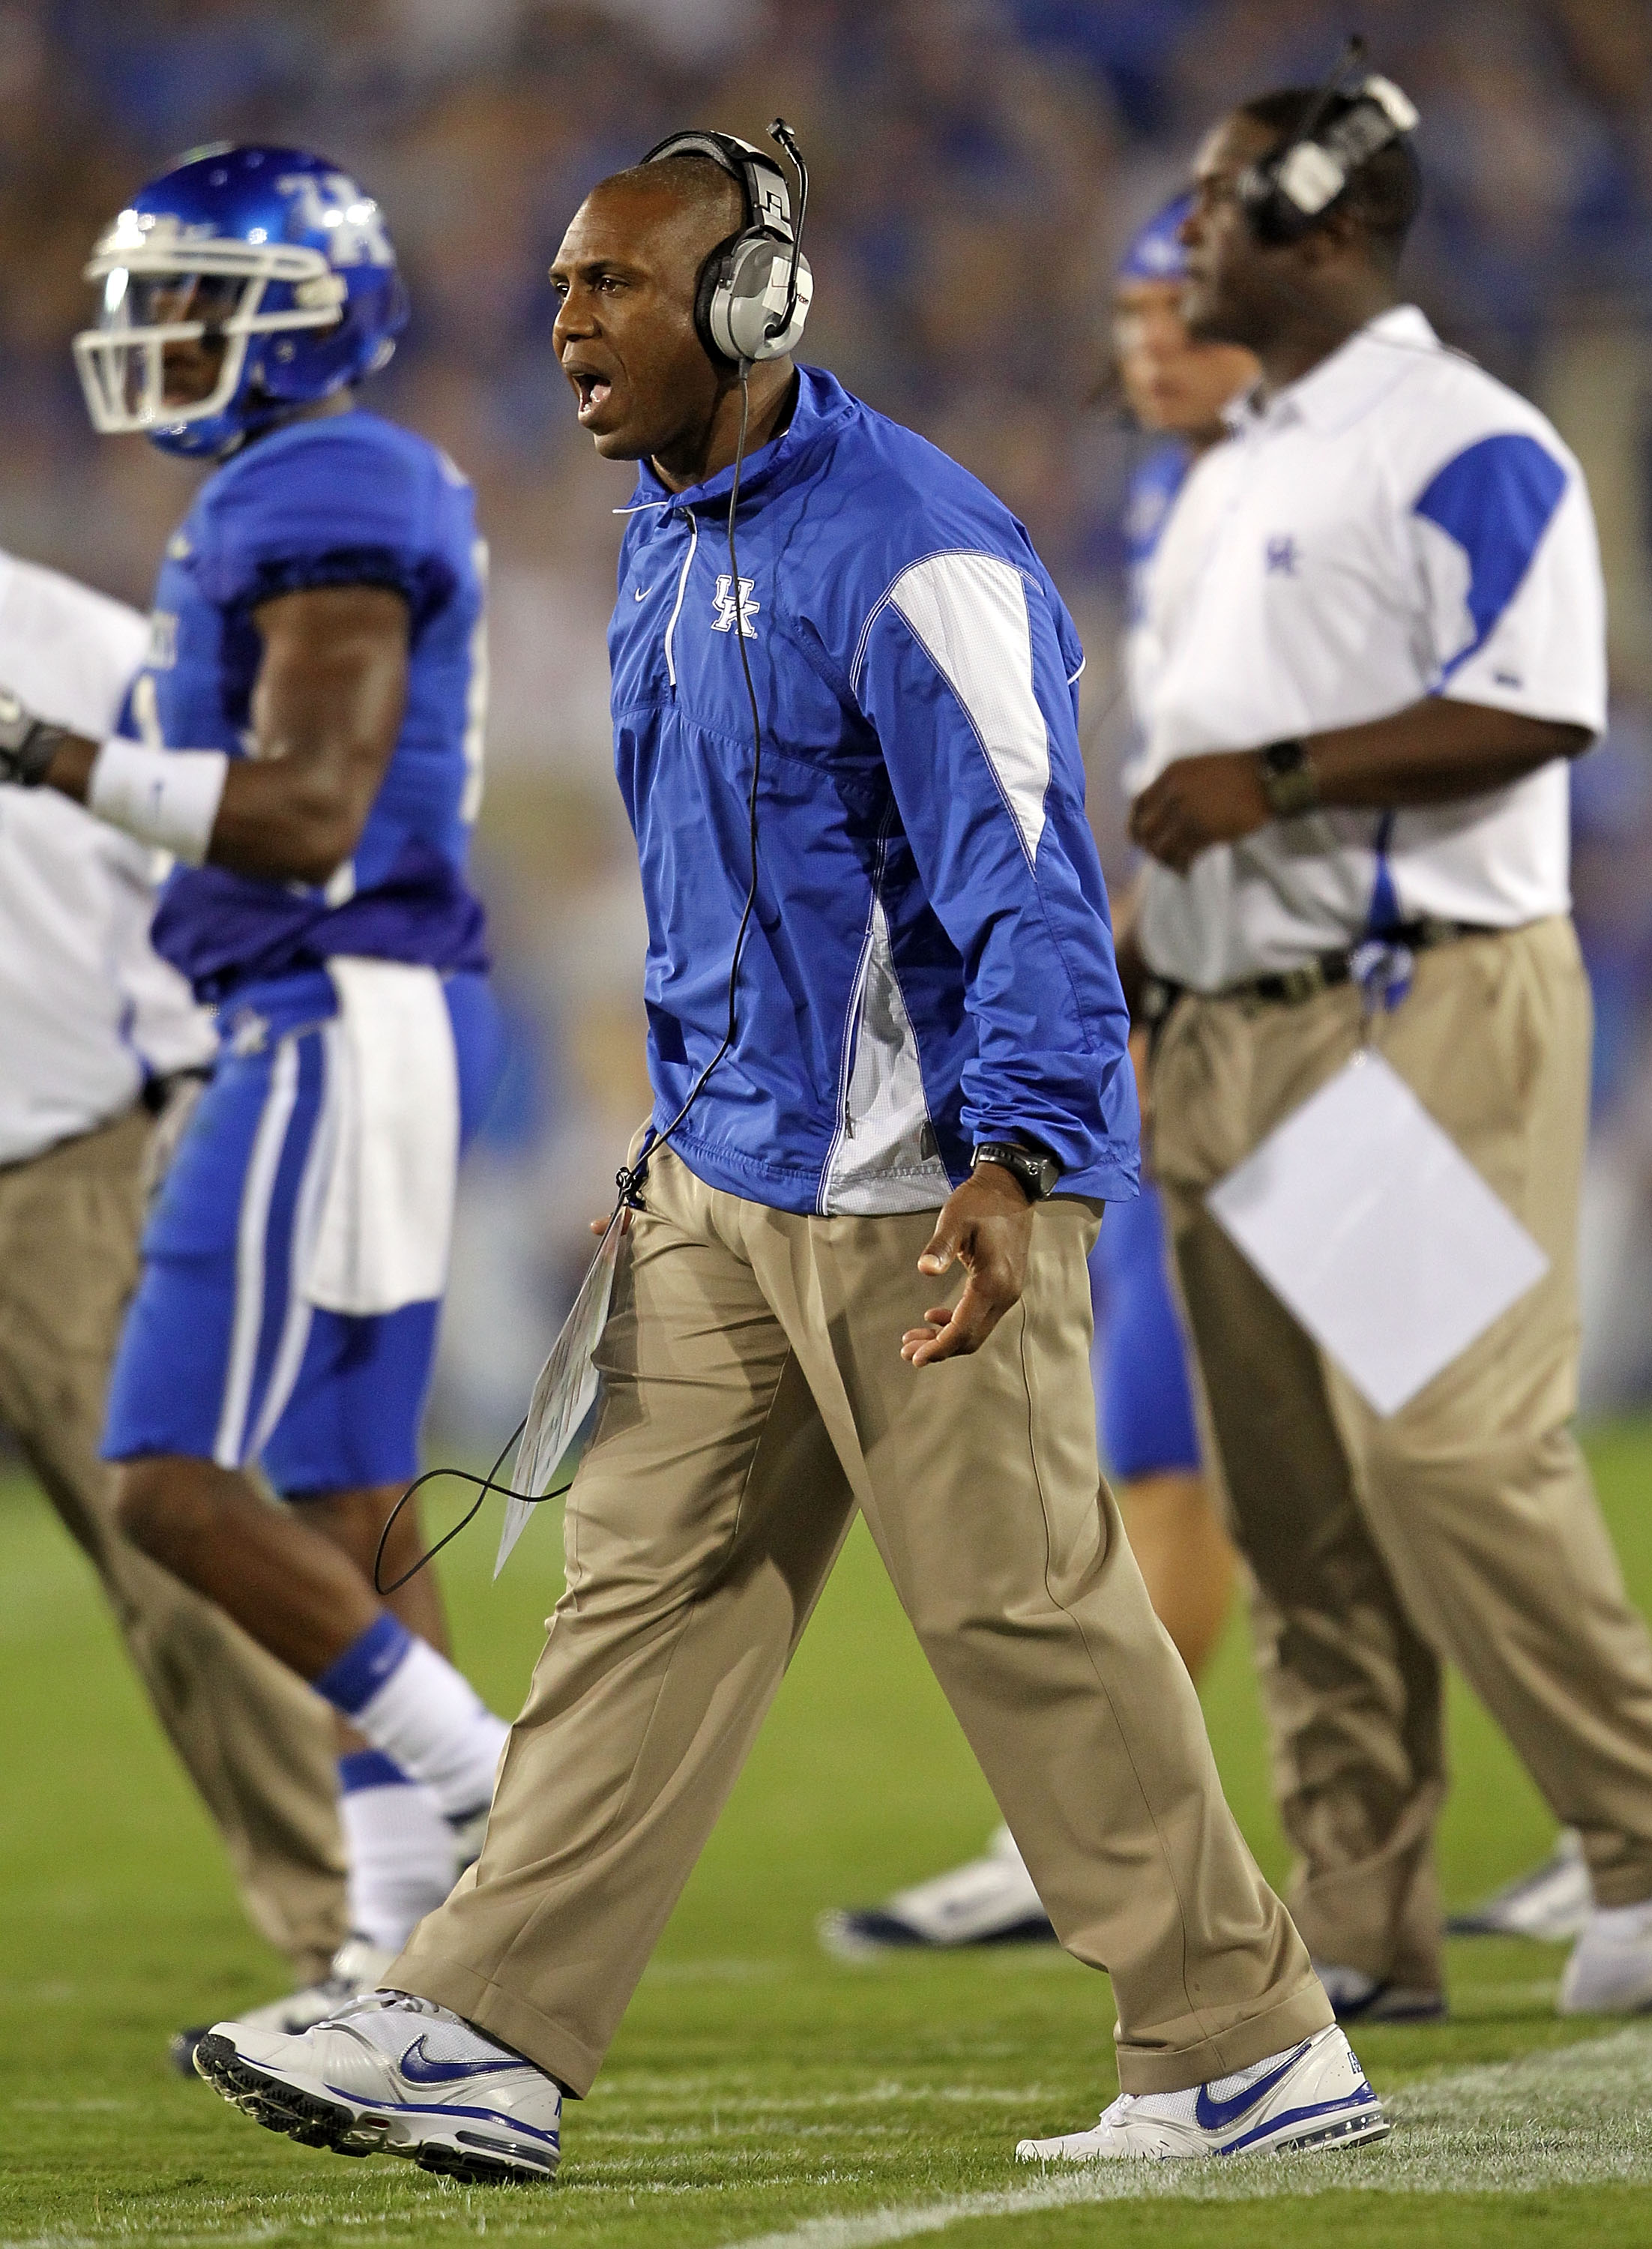 LEXINGTON, KY - SEPTEMBER 18:  Joker Phillips the Head Coach of the Kentucky Wildcats during the game against the Akron Zips at Commonwealth Stadium on September 18, 2010 in Lexington, Kentucky.  (Photo by Andy Lyons/Getty Images)